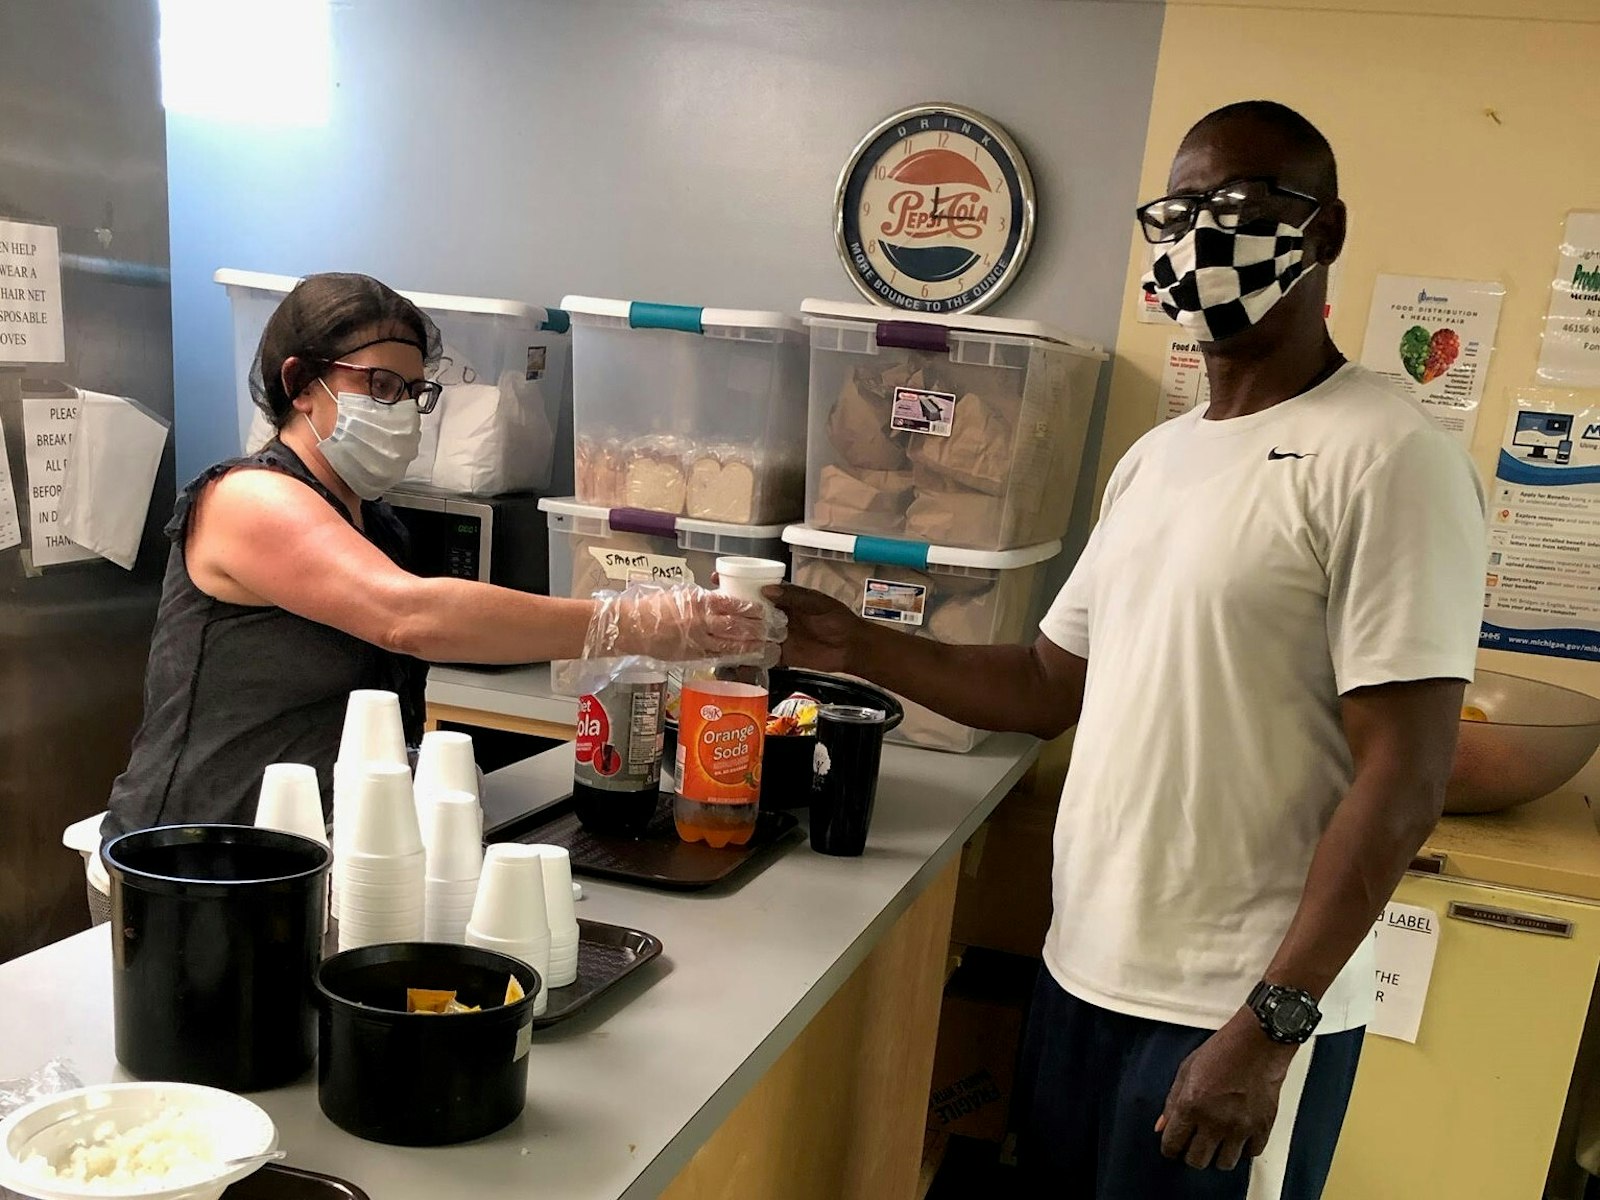 A HOPE Shelters volunteer serves a meal to a guest at its Pontiac kitchen. Each year, the shelter serves approximately 400 individuals. (Courtesy of Brian Wright)